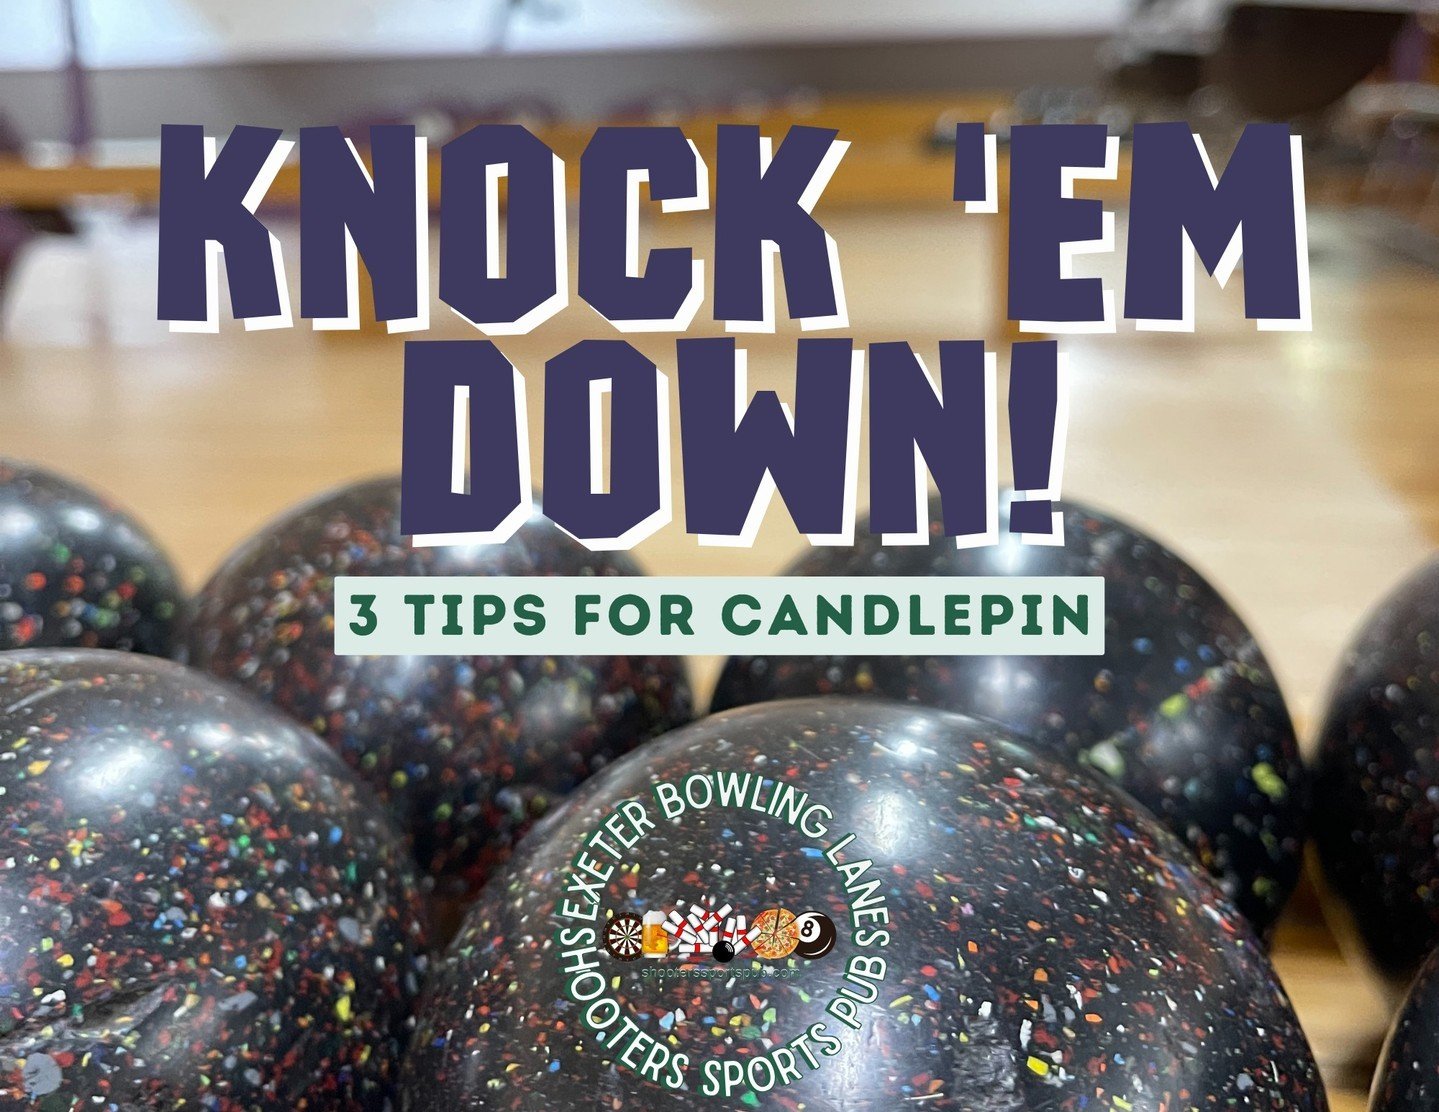 🎳 Candlepin Clinic: Quick Tips!⁠
⁠
🌟Aim Small, Miss Small: Focus on a single pin or spot for precision.⁠
🌟Smooth Operator: Keep your arm swing and release as fluid as silk.⁠
🌟Consistency is Key: Practice the same approach and delivery every time.